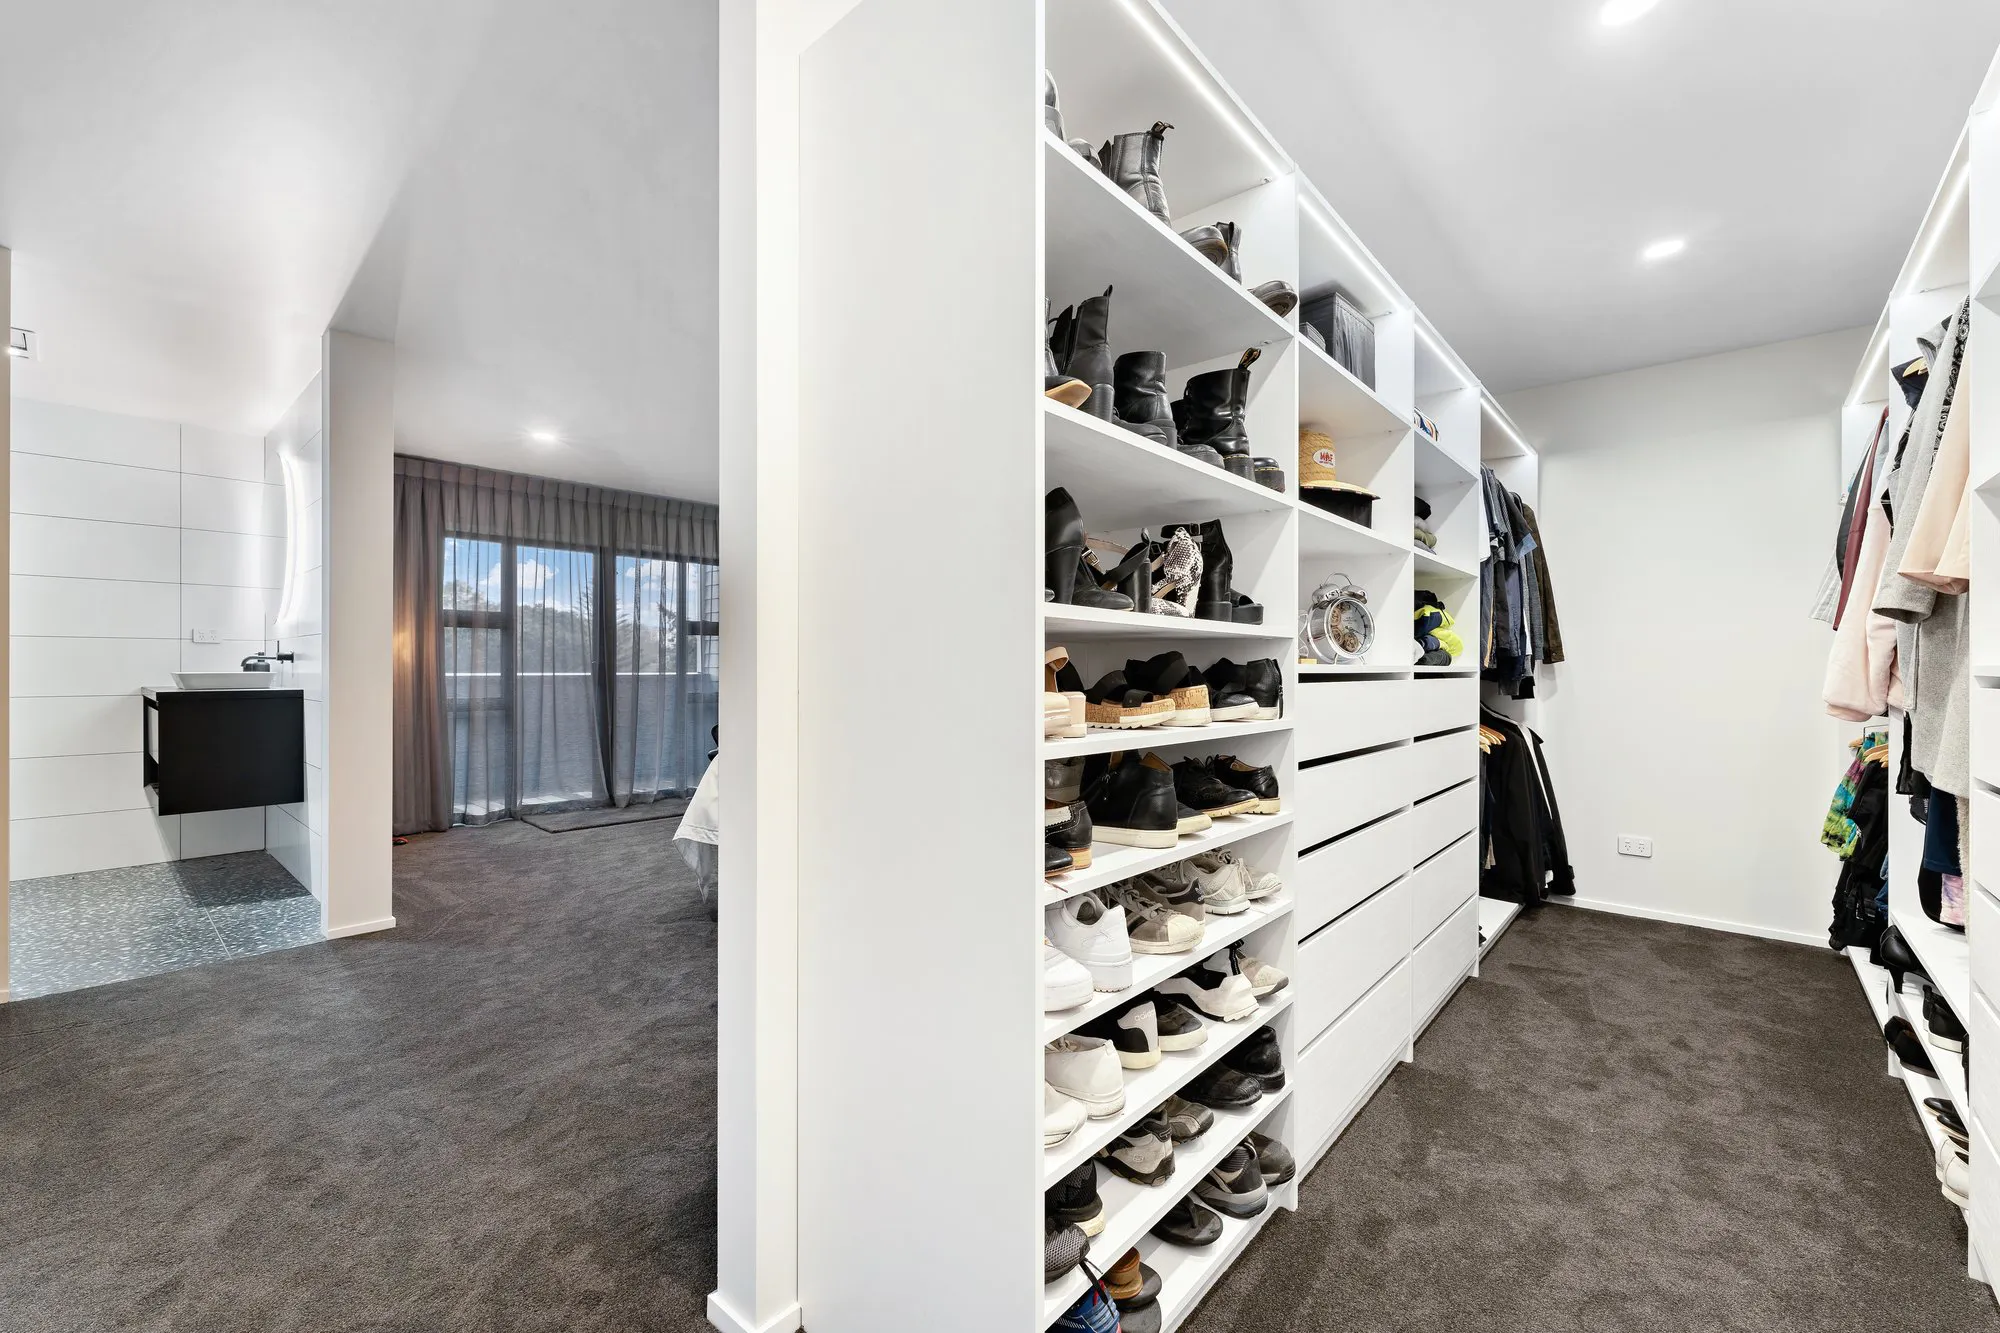 Article-4-Wardrobe-storage-solutions-and-tips-3